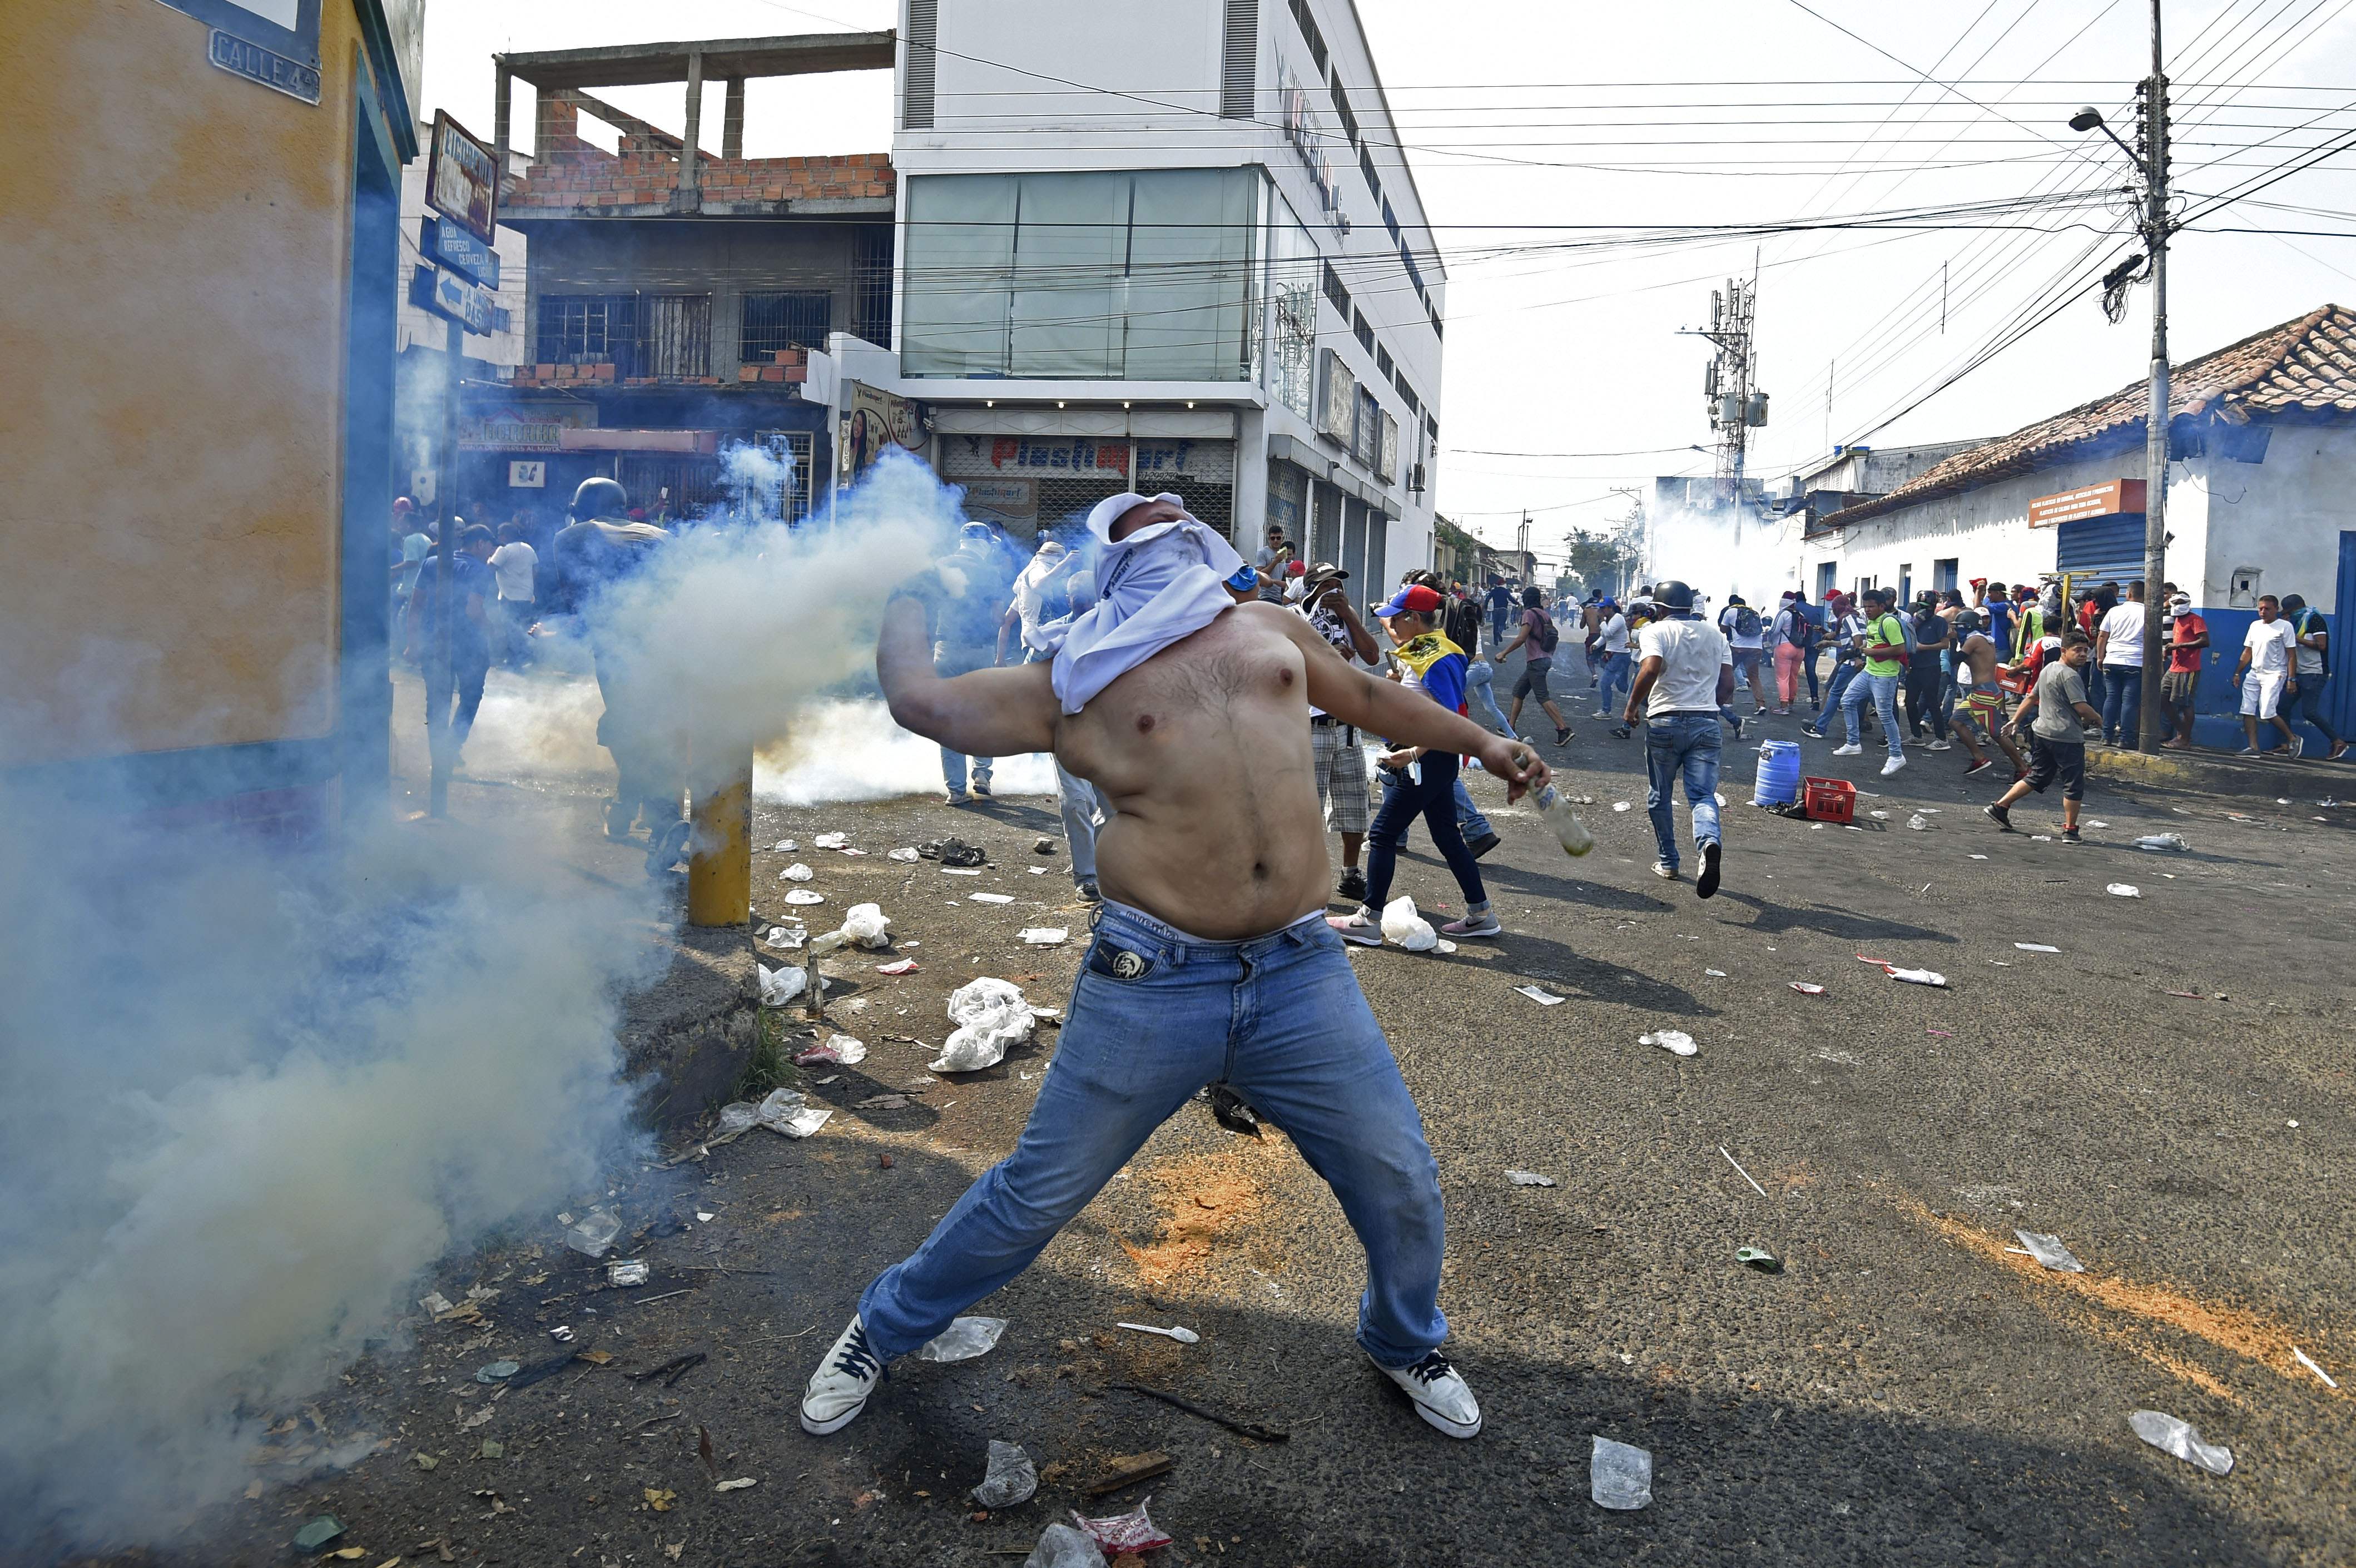 Venezuelans hold a protest in the border city of Urena, Tachira, after President Nicolas Maduro's government ordered a temporary close-down of the border with Colombia on February 23, 2019. - Venezuela braced for a showdown between the military and regime opponents at the Colombian border on Saturday, when self-declared acting president Juan Guaido has vowed humanitarian aid would enter his country despite a blockade (Photo by JUAN BARRETO / AFP)